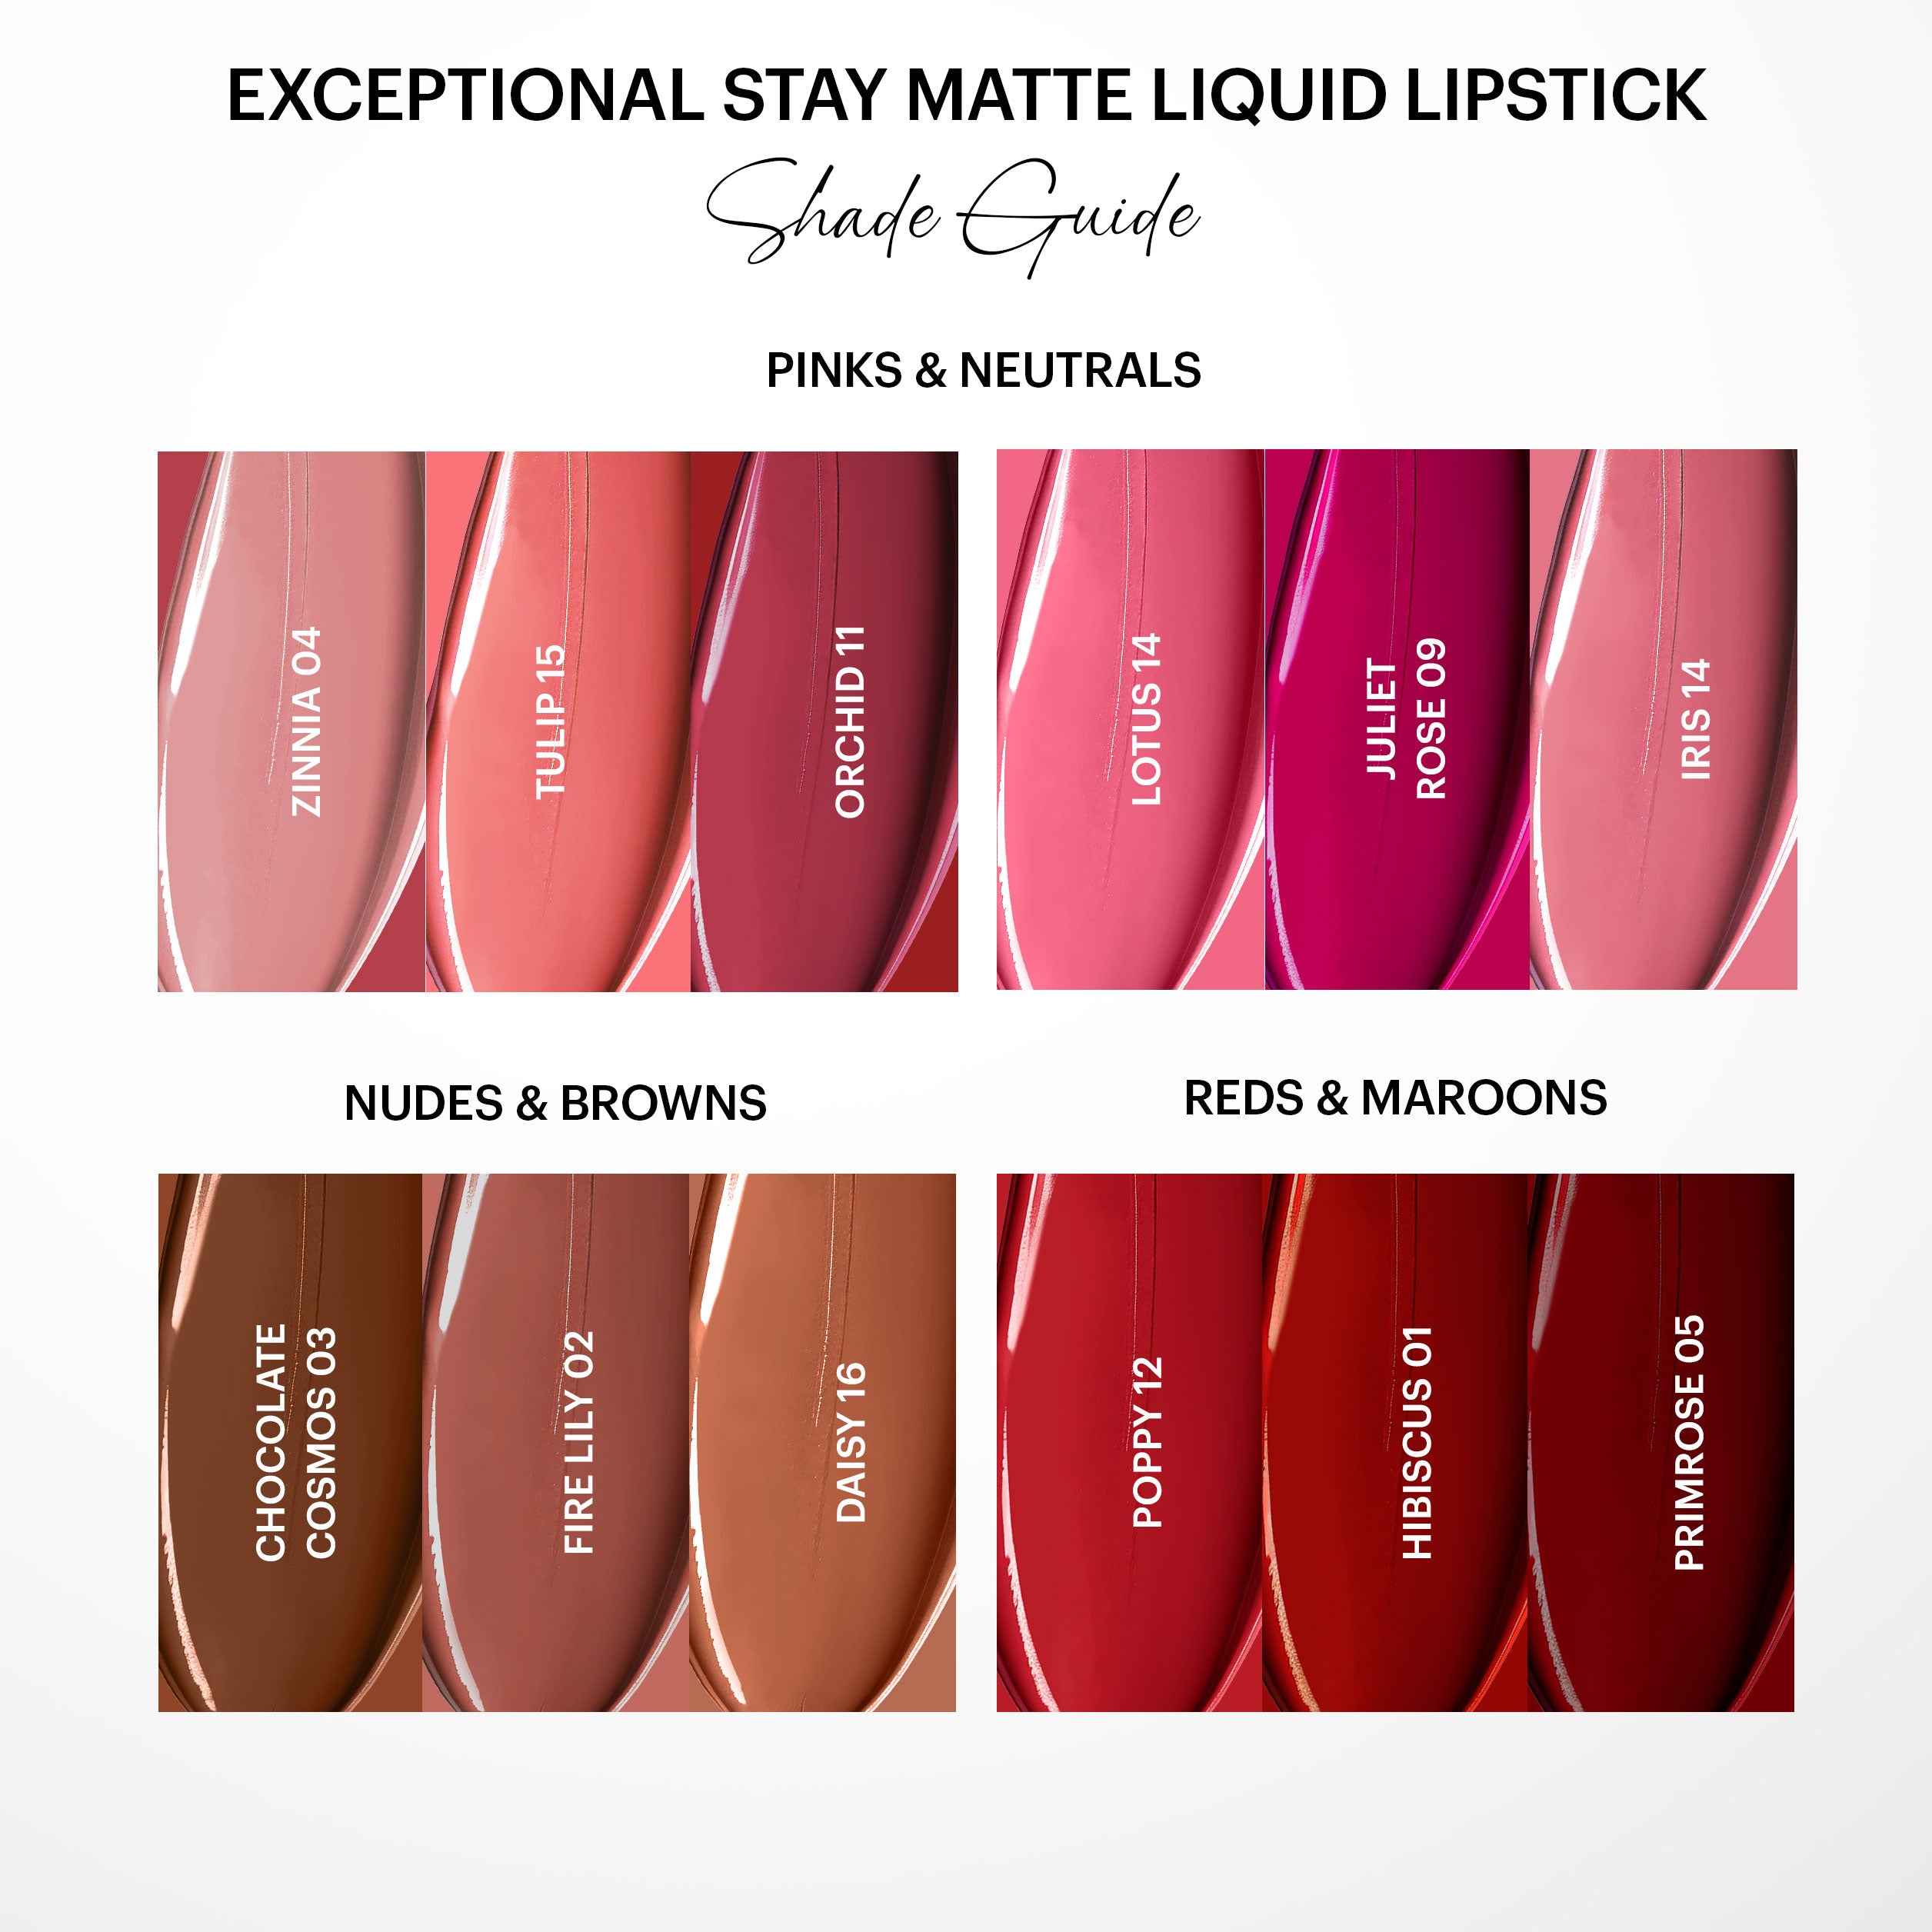 Exceptional Stay Matte Liquid Lipstick Shade: Chocolate Cosmos 03